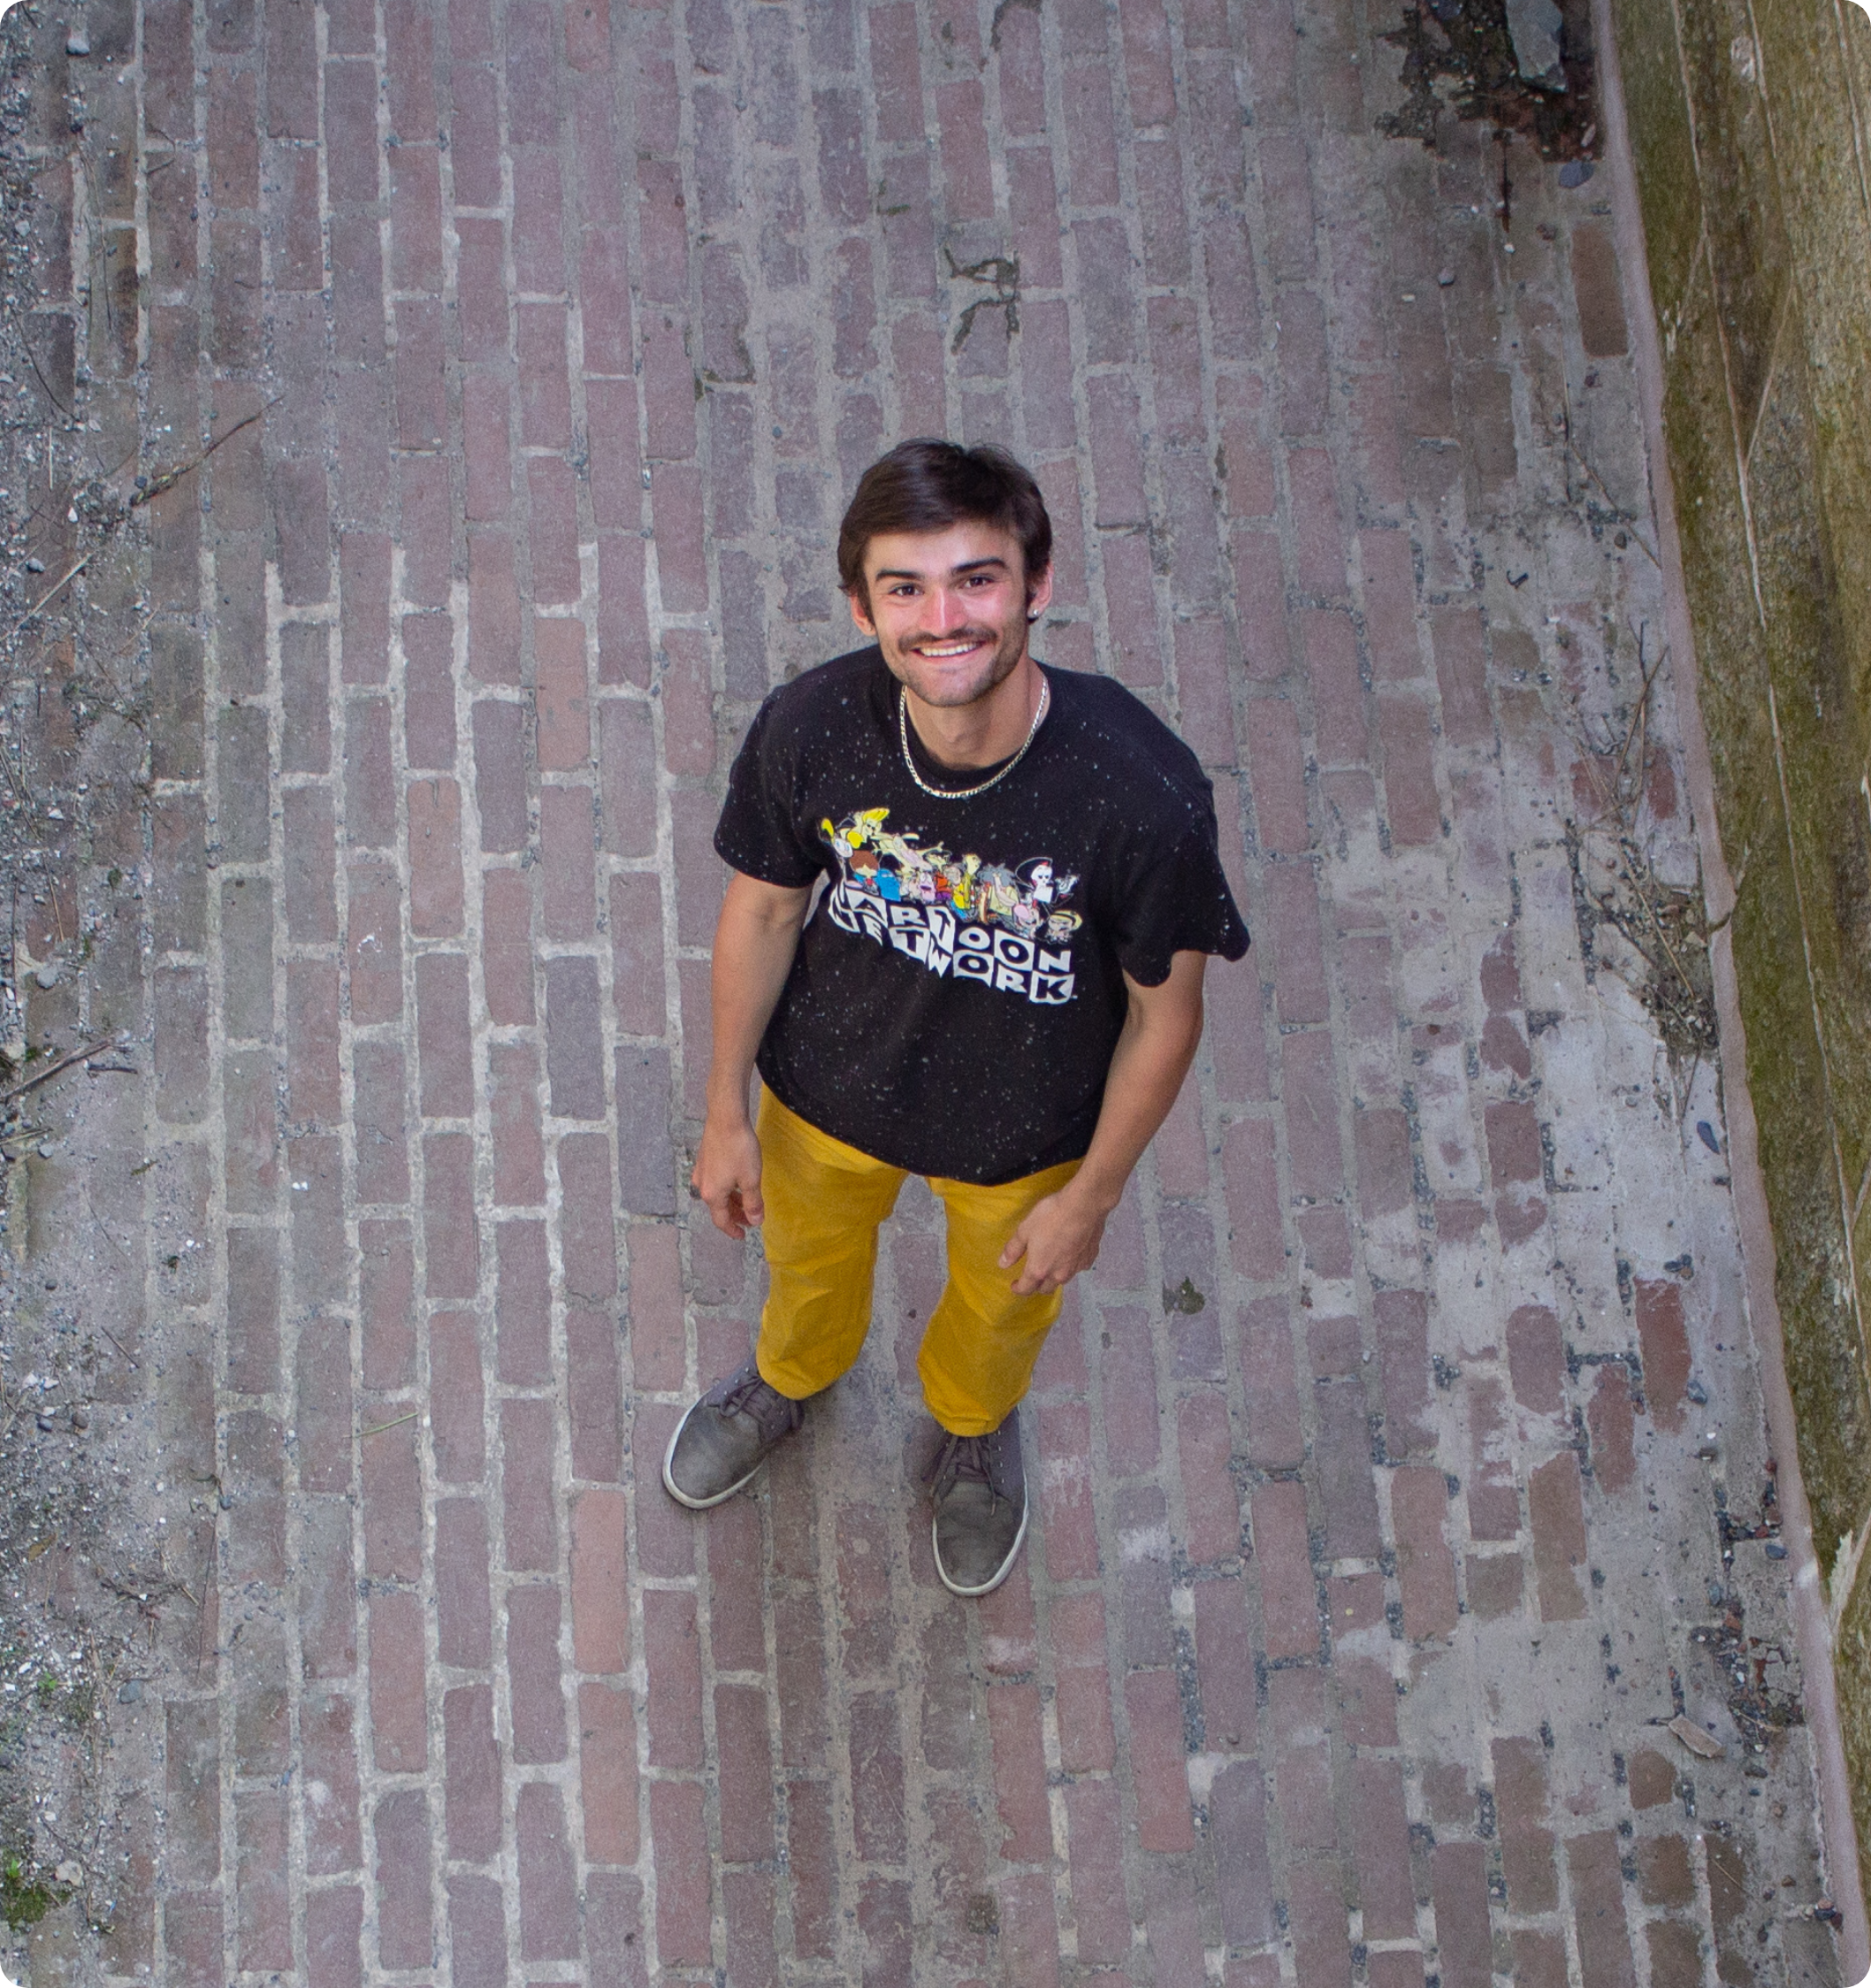 Photograph of Sam Giustizia smiling, taken from a top down perspective while he's in some kind of outdoor concrete room